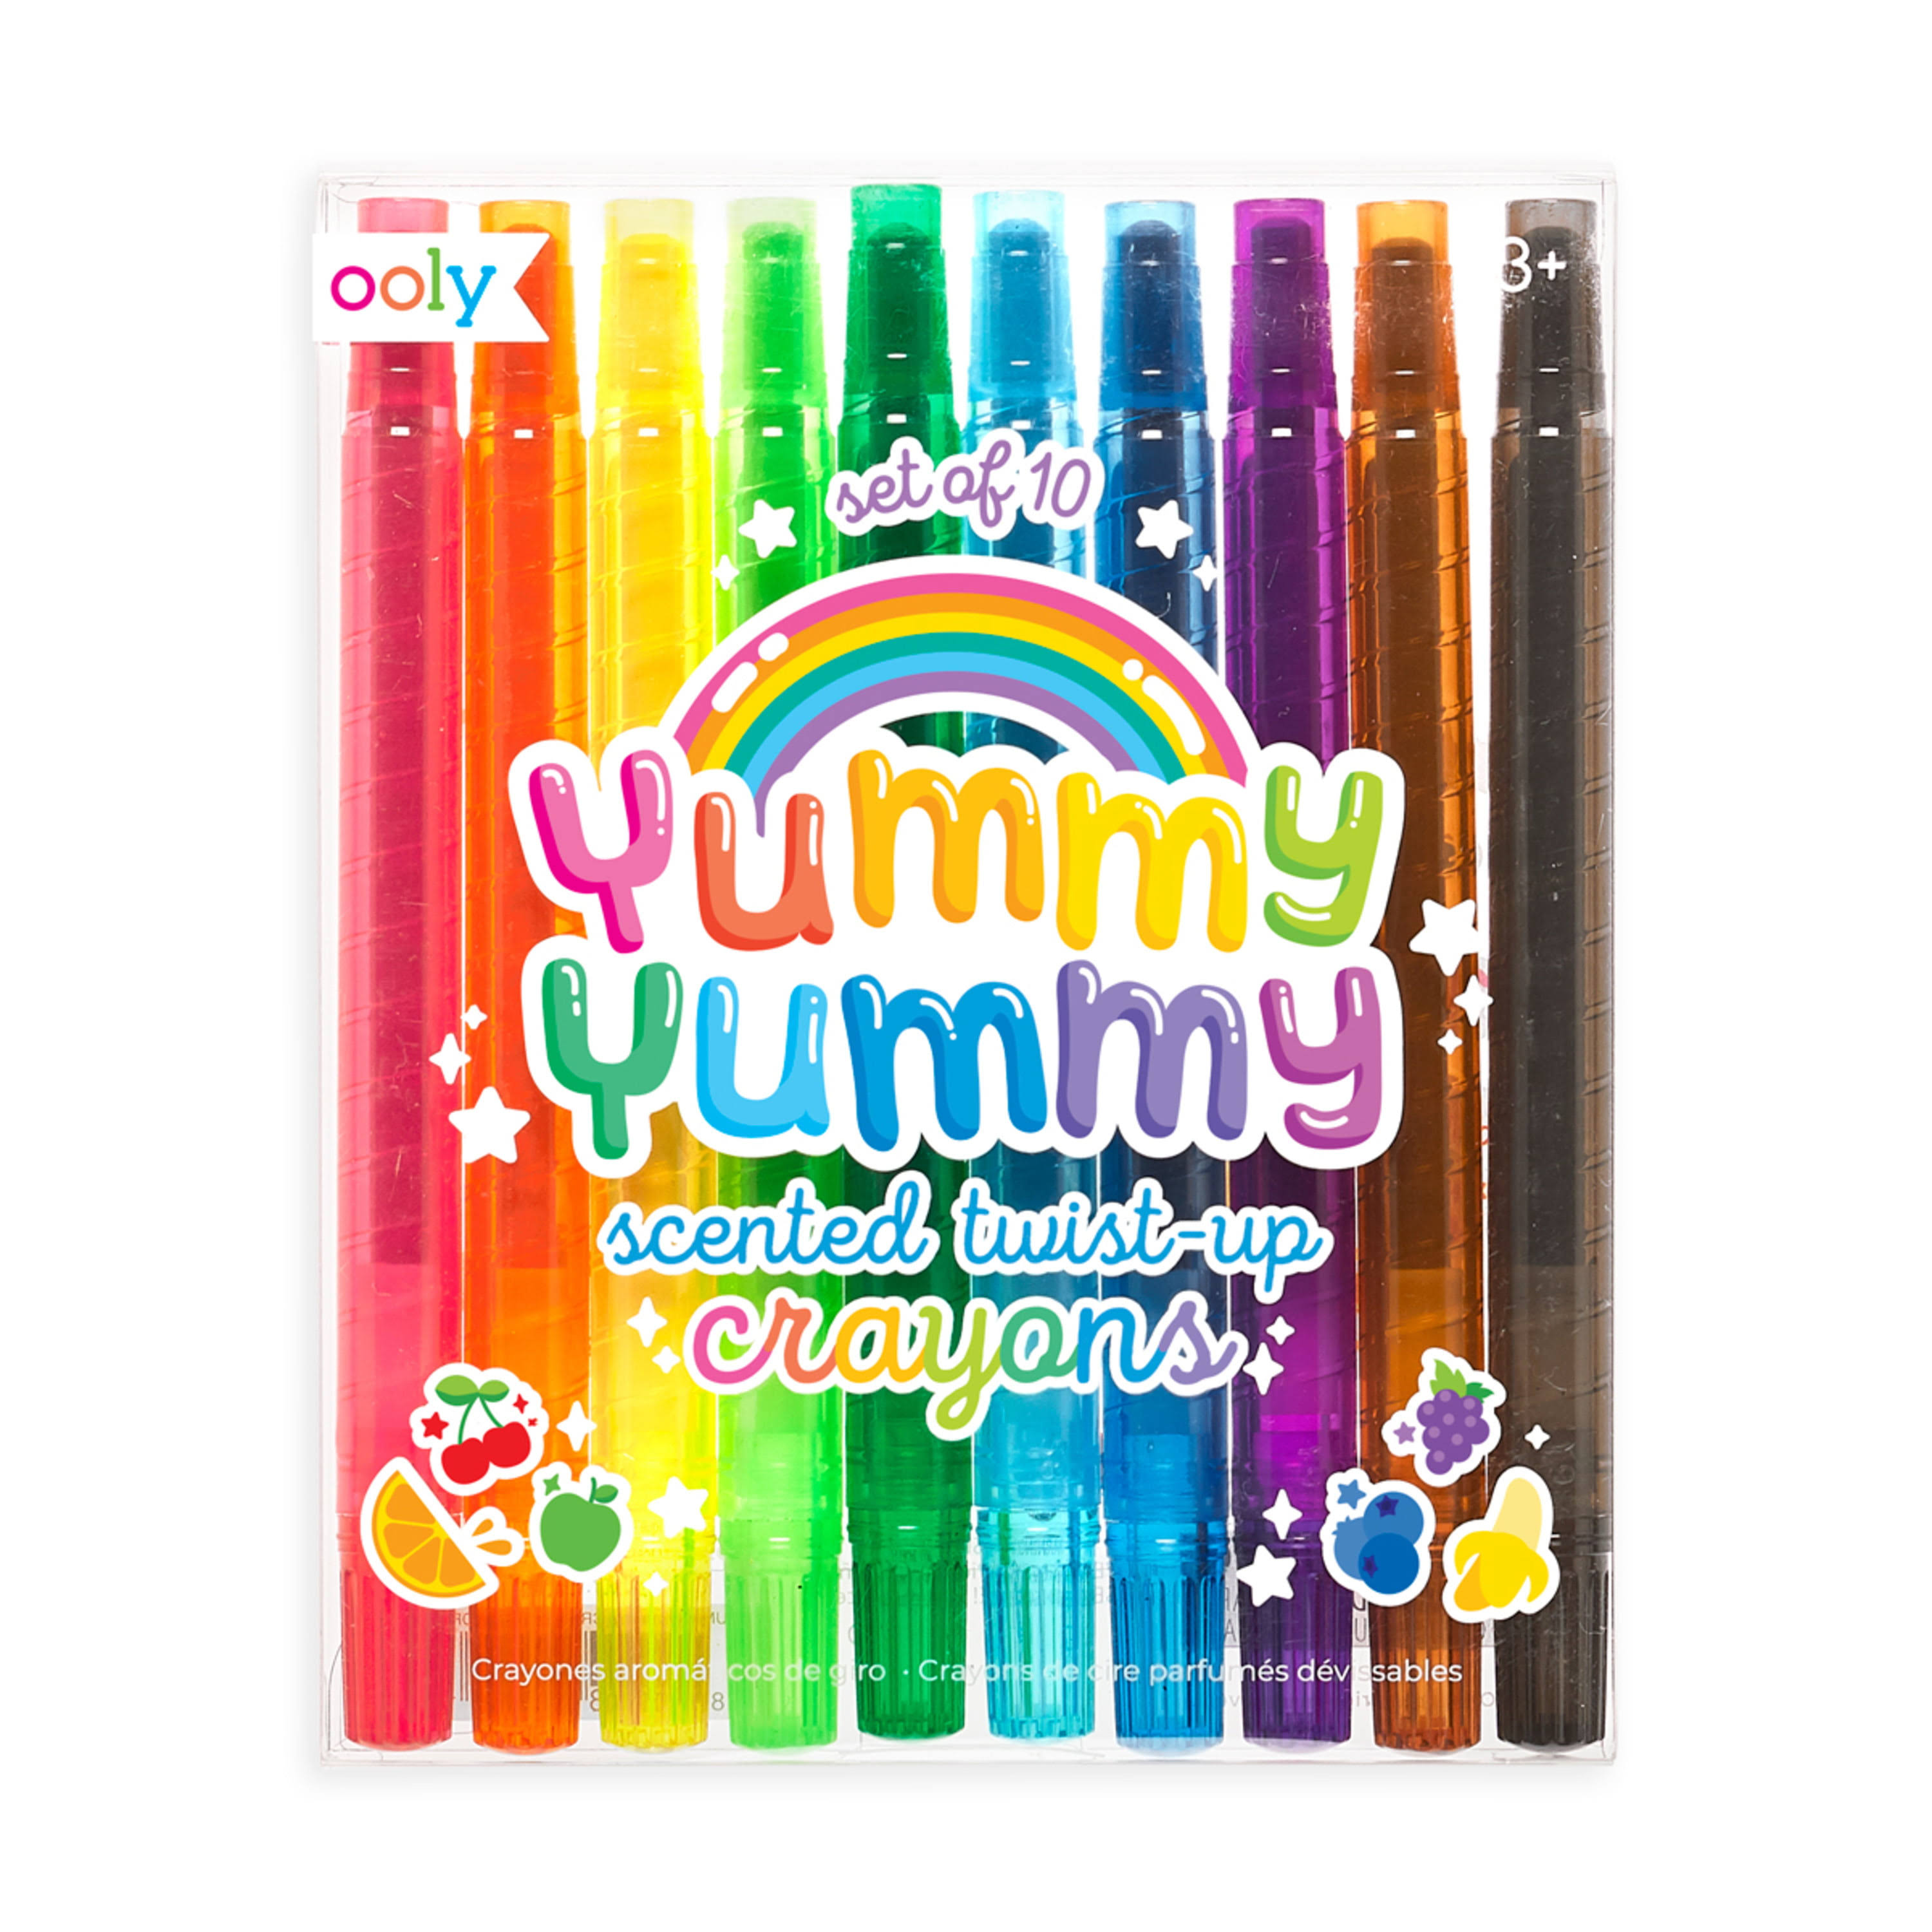 Ooly Yummy Scented Twist Up Crayons